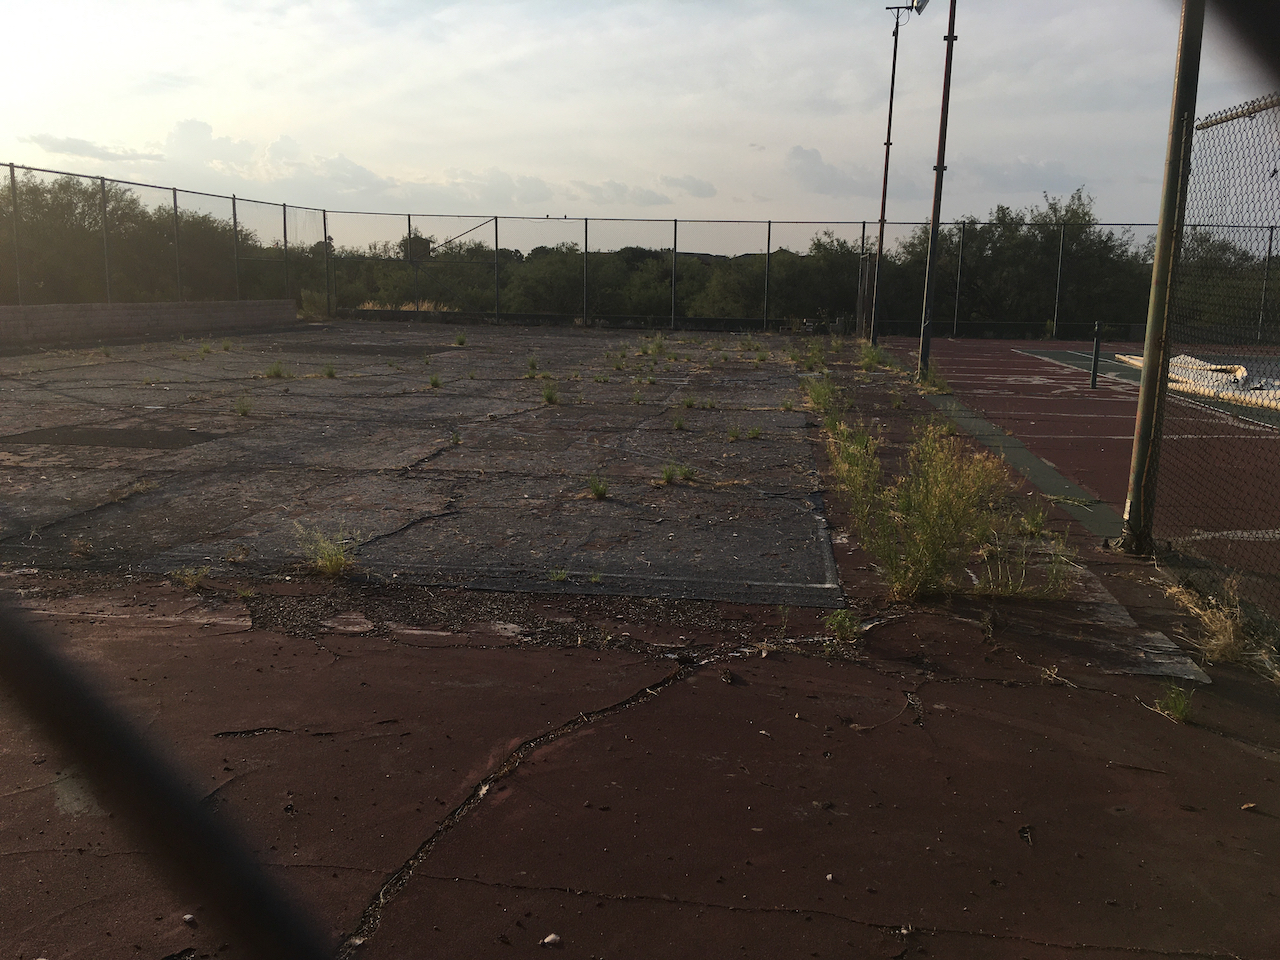 The abandoned tennis courts in Arizona where I learned how to play. Hopefully, not reflective of my present game.